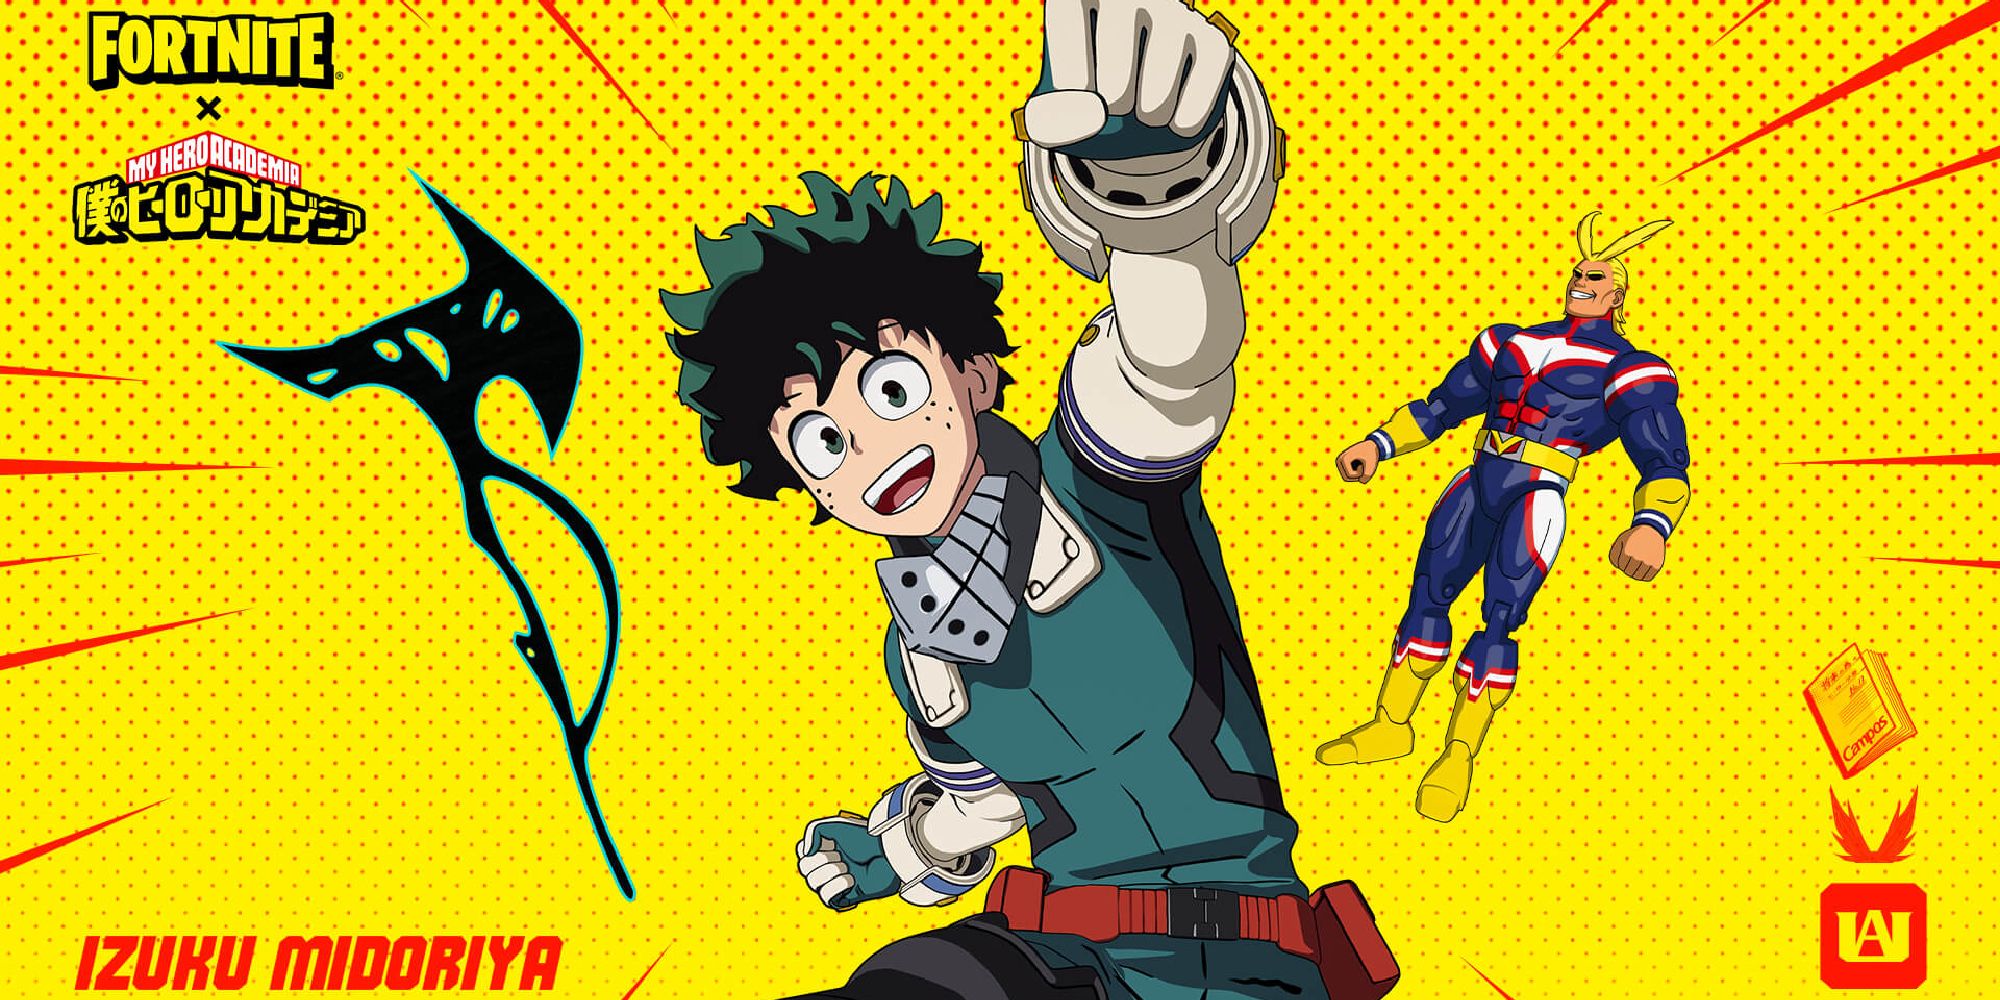 Deku pumping one fist in the air atop a bright yellow background